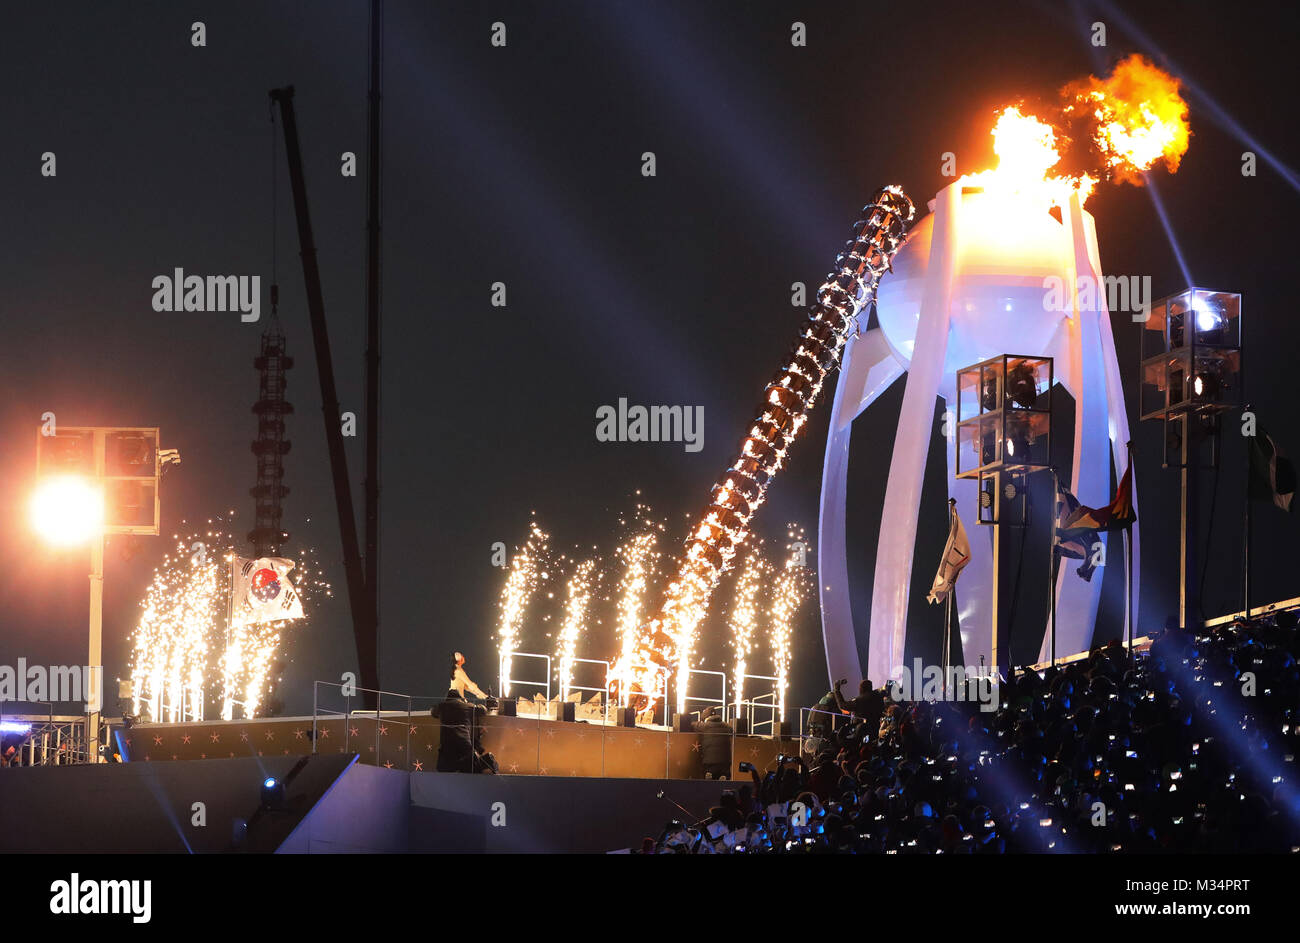 Pyeongchang, South Korea. 9th Feb, 2018. The Olympic flame is lit by Jong Su Hyon from North Korea and Park Jong-ah from South Korea at the opening ceremony of the Winter Olympics in Pyeongchang, South Korea, 9 February 2018. Credit: Michael Kappeler/dpa/Alamy Live News Stock Photo